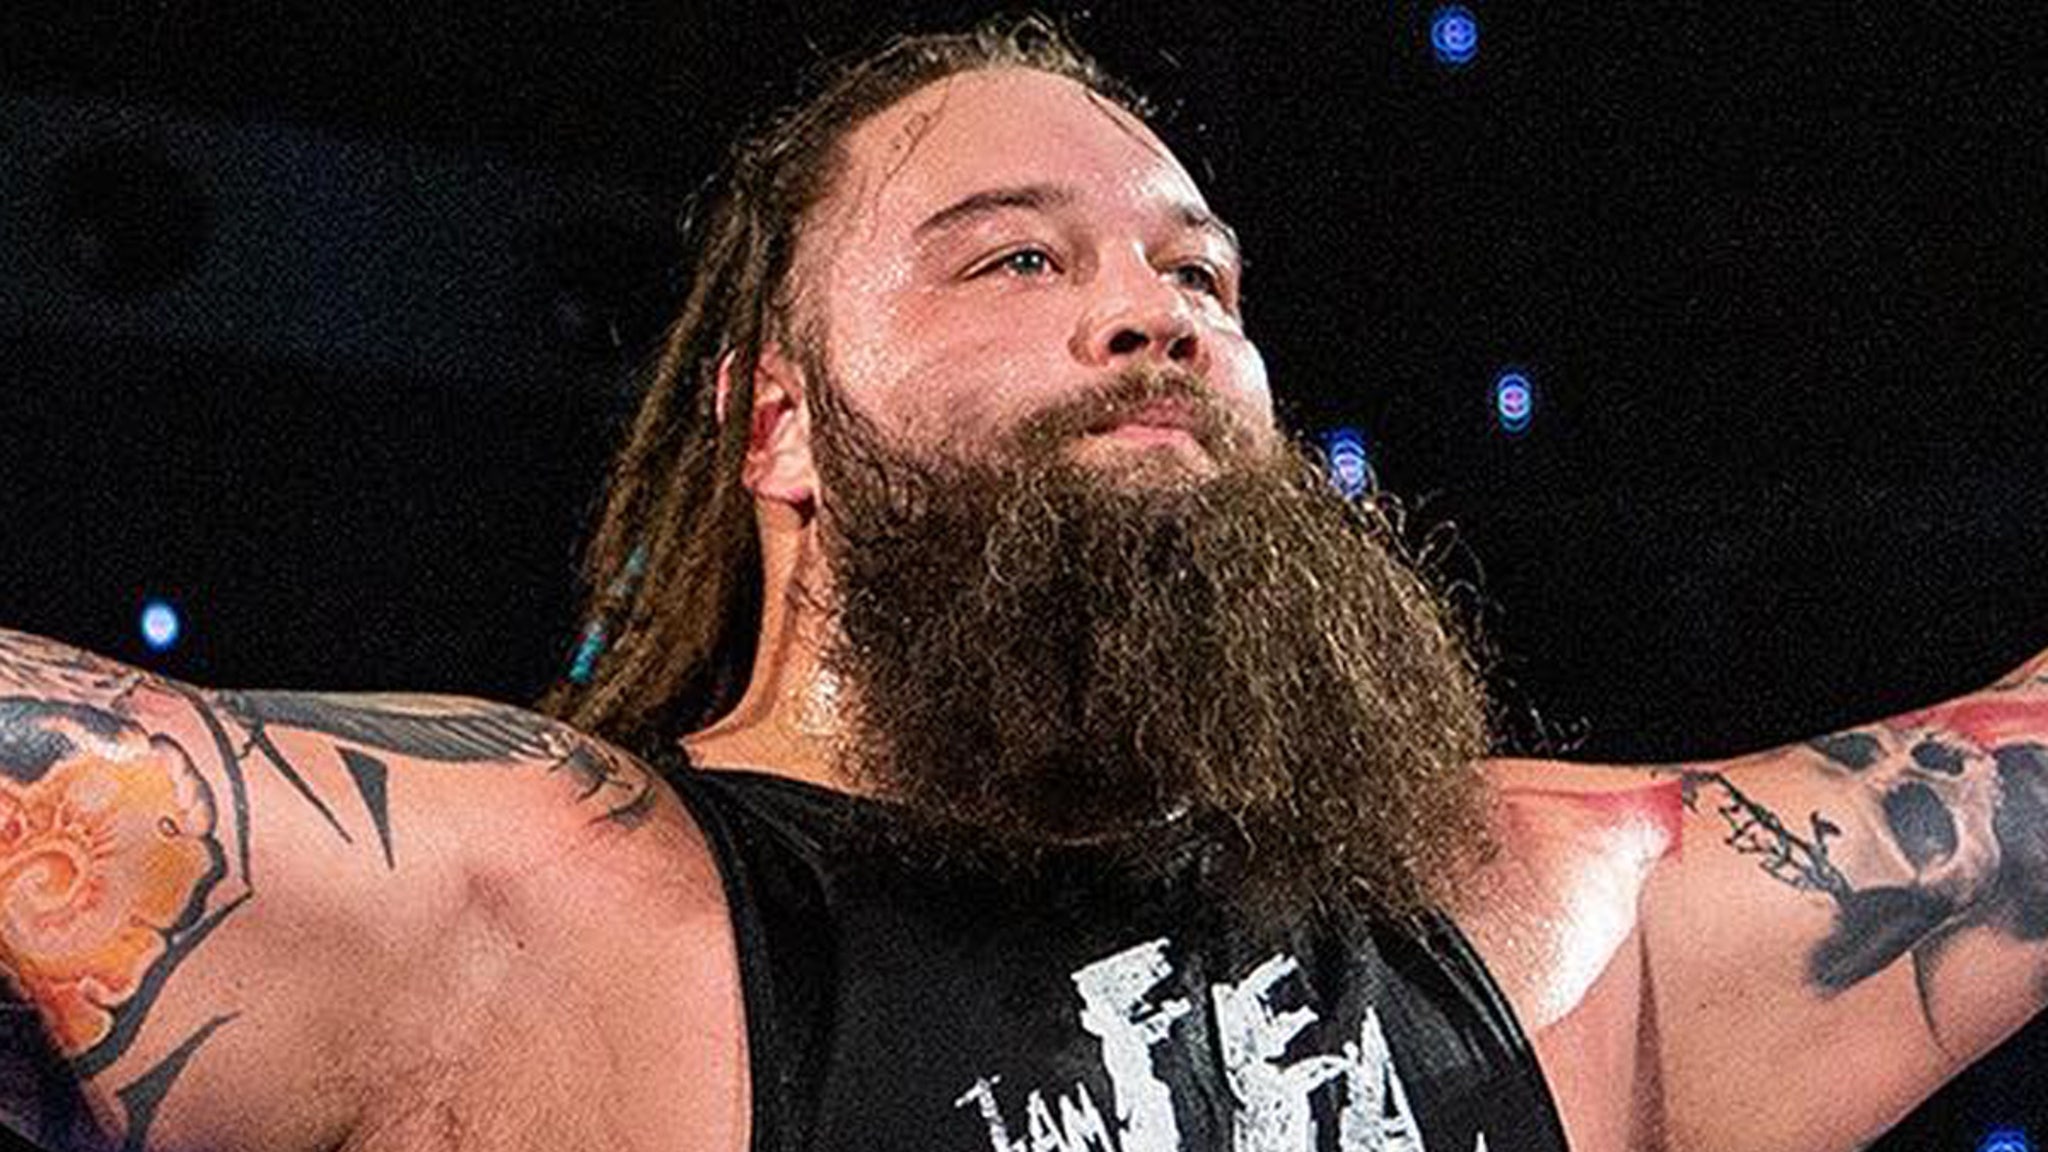 Bray Wyatt was not wearing a heart defibrillator at the time of his death, despite the recommendation